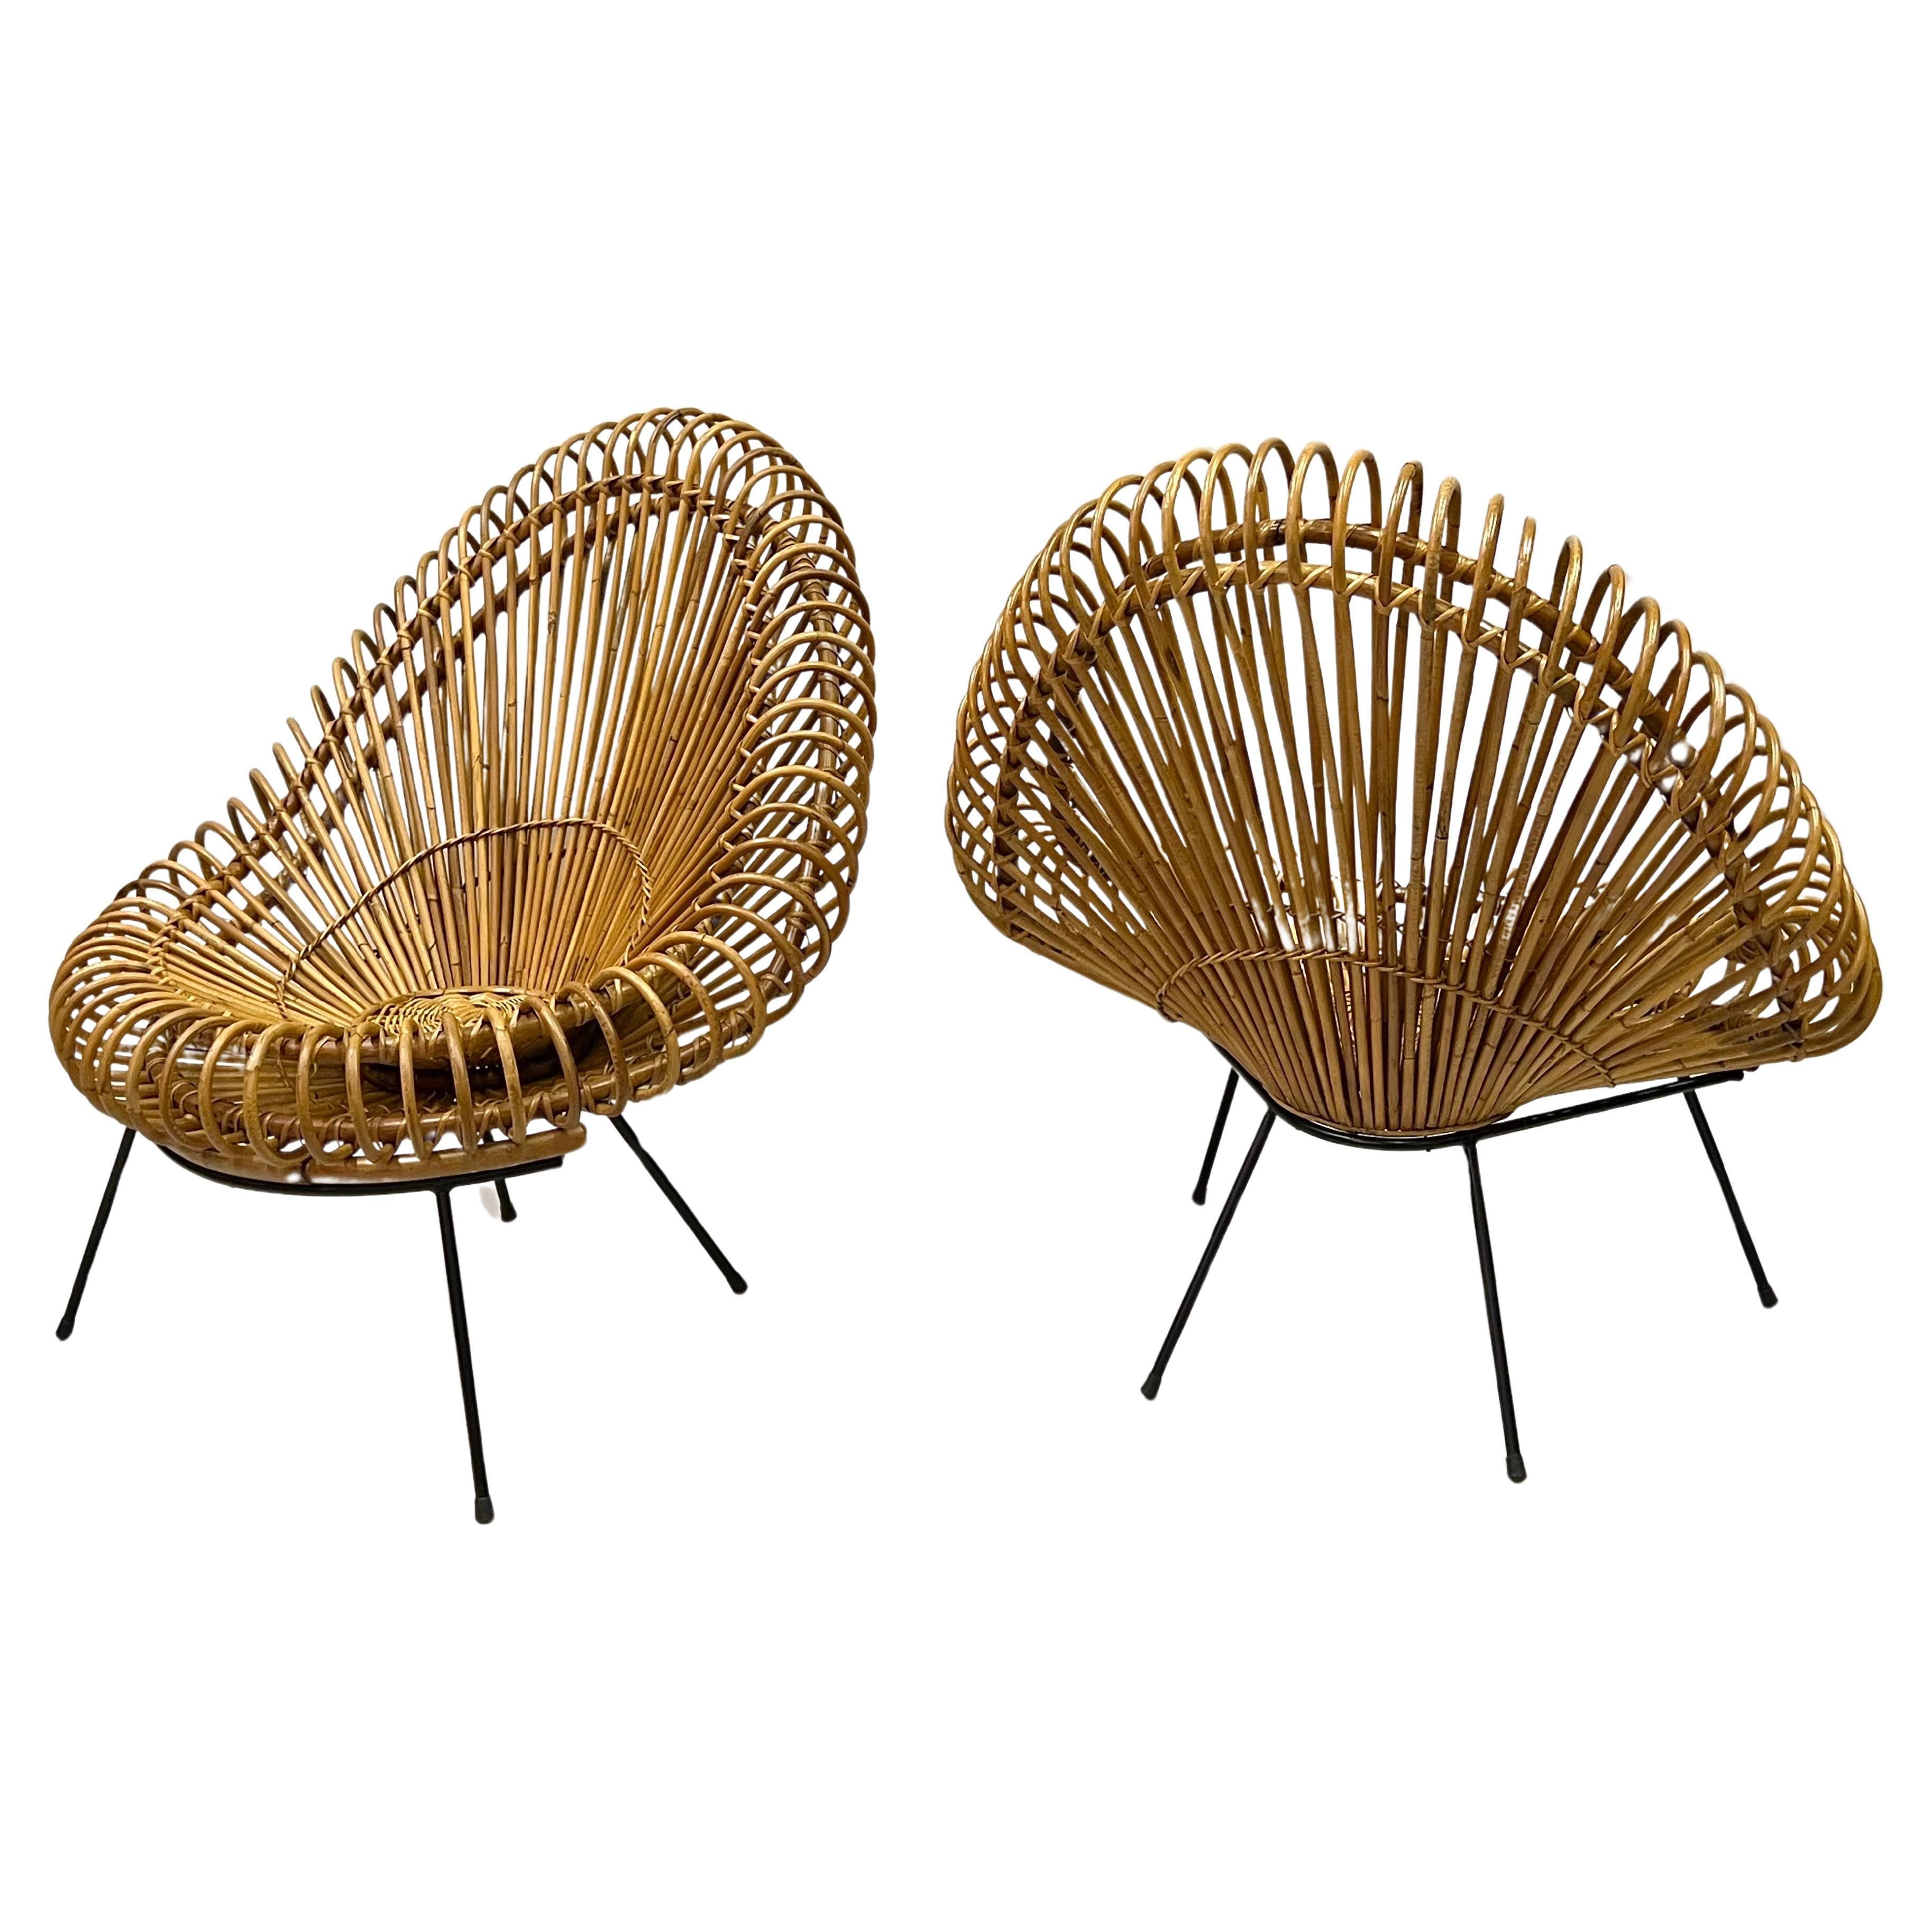 Pair of Large French Rattan Lounge Chairs by Janine Abraham & Dirk Jan Roi